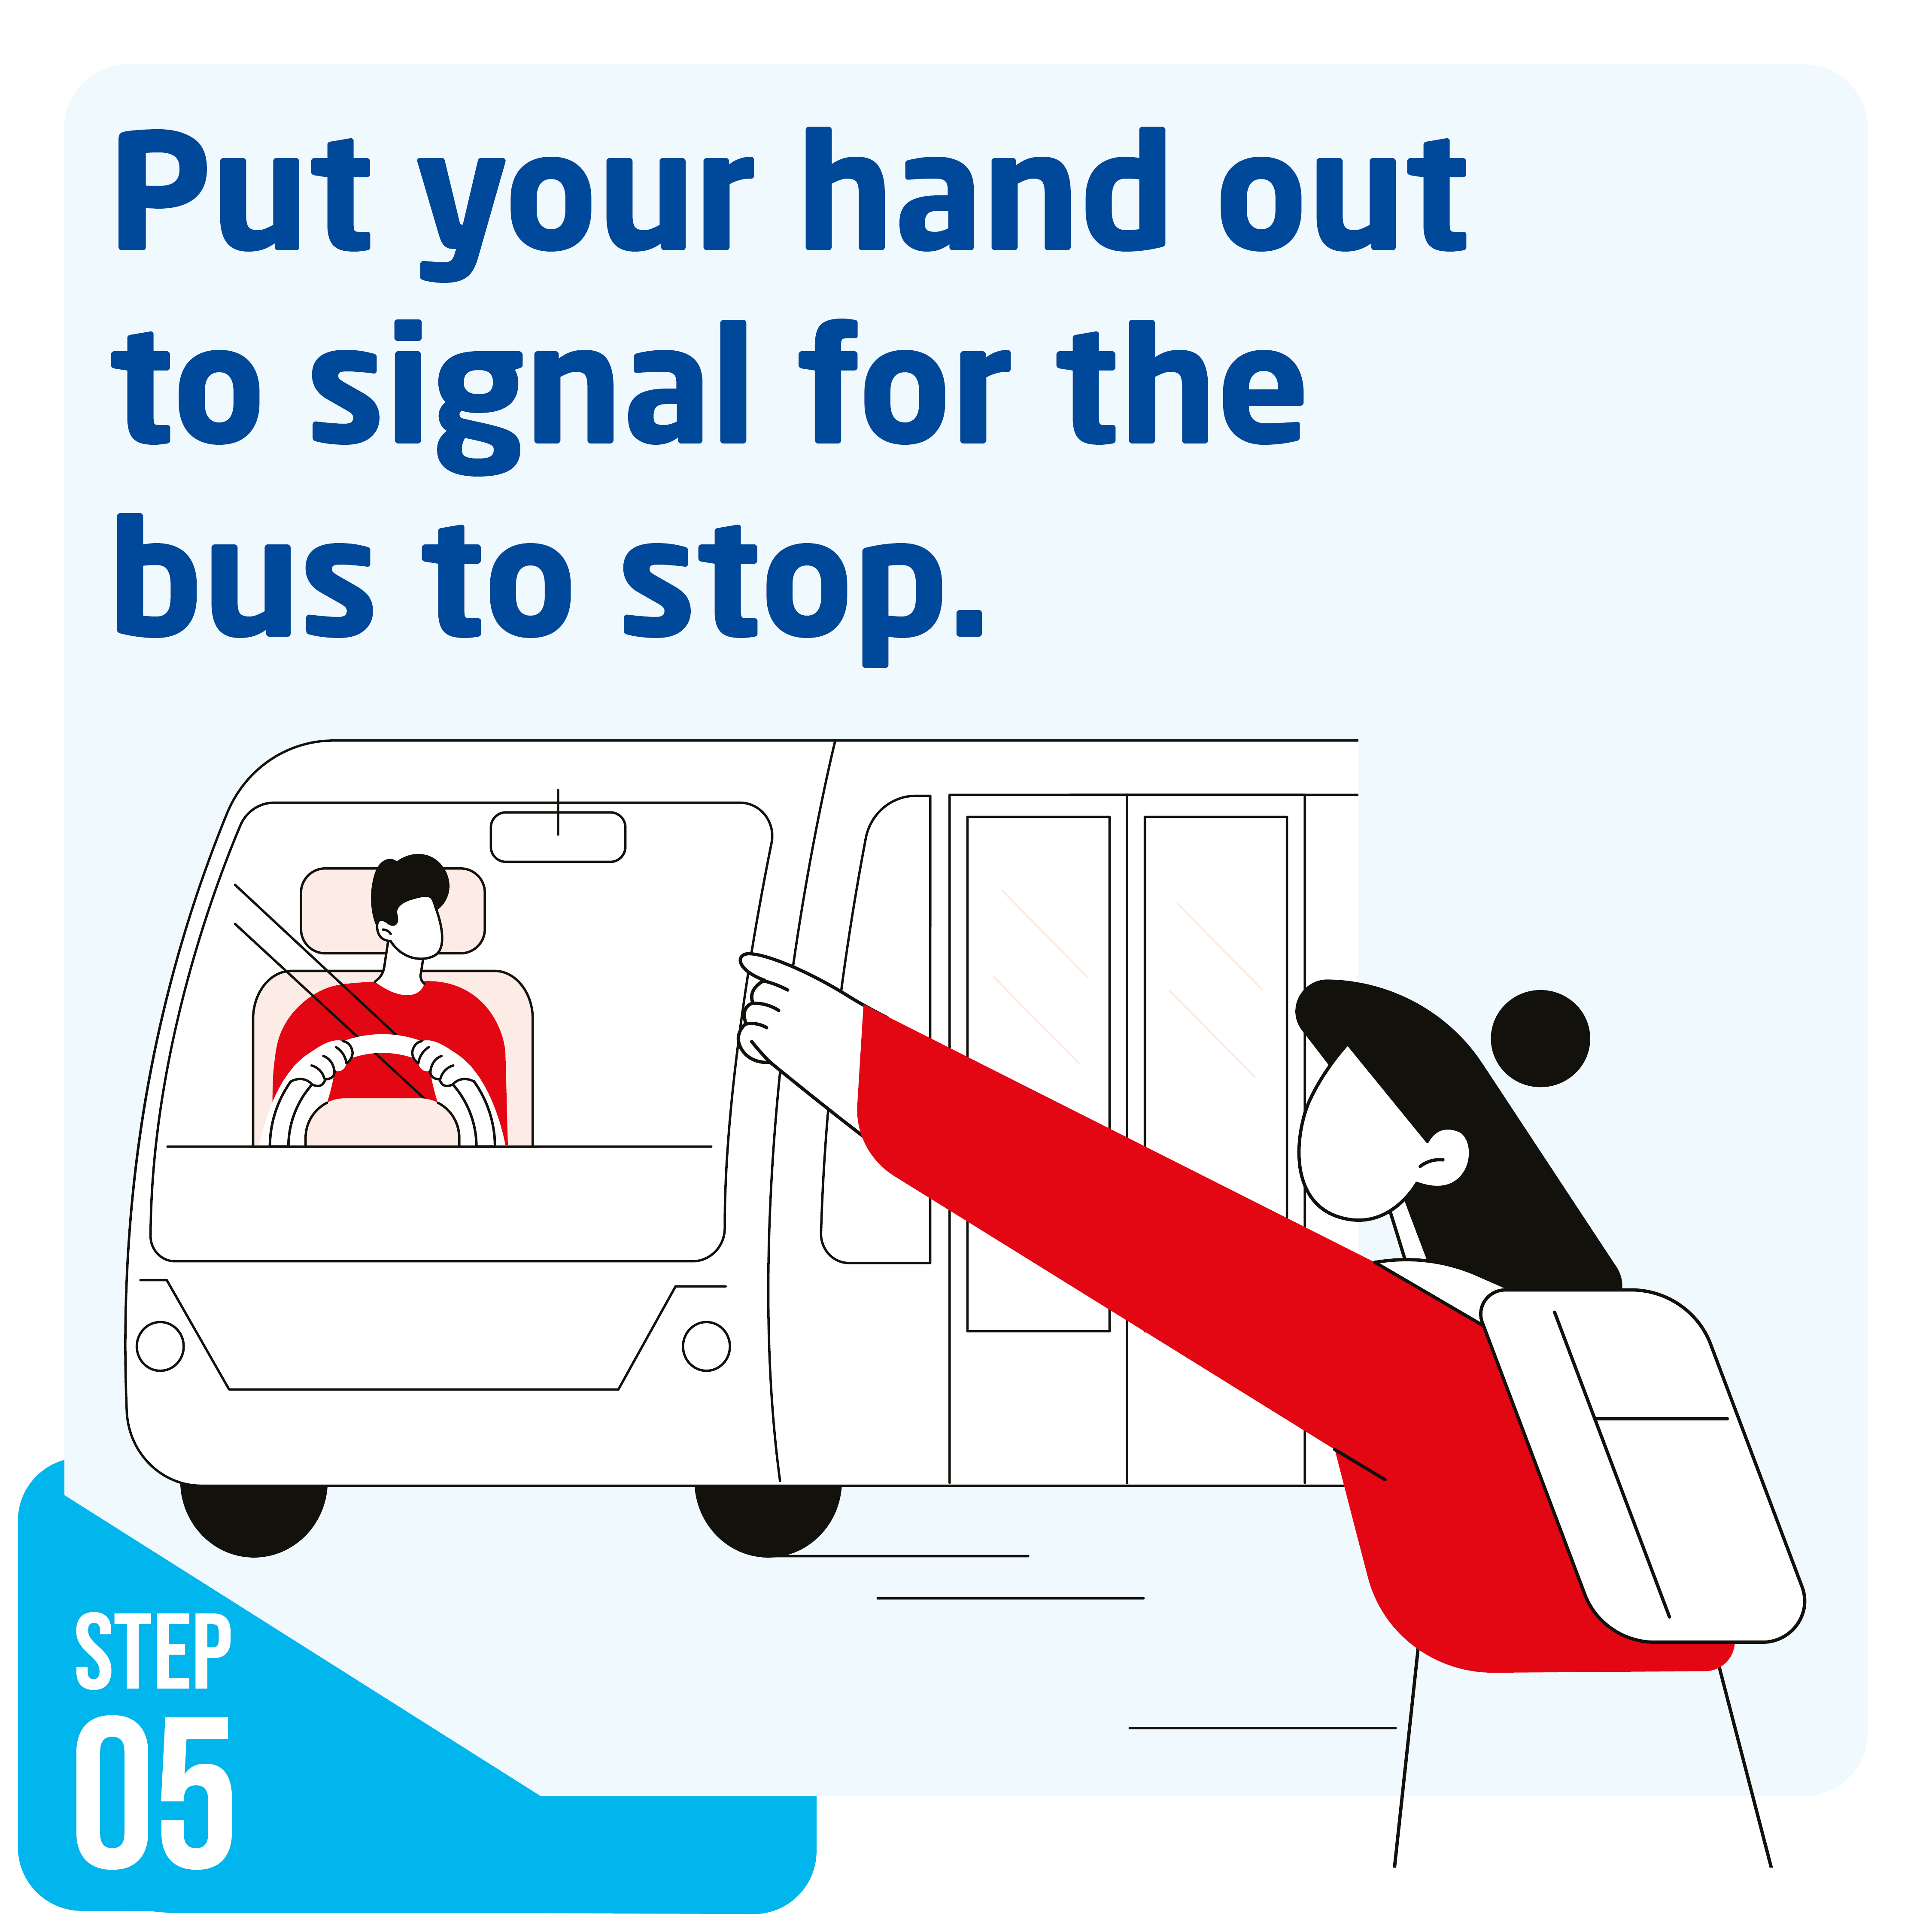 image of someone putting their arm out to signal for the bus